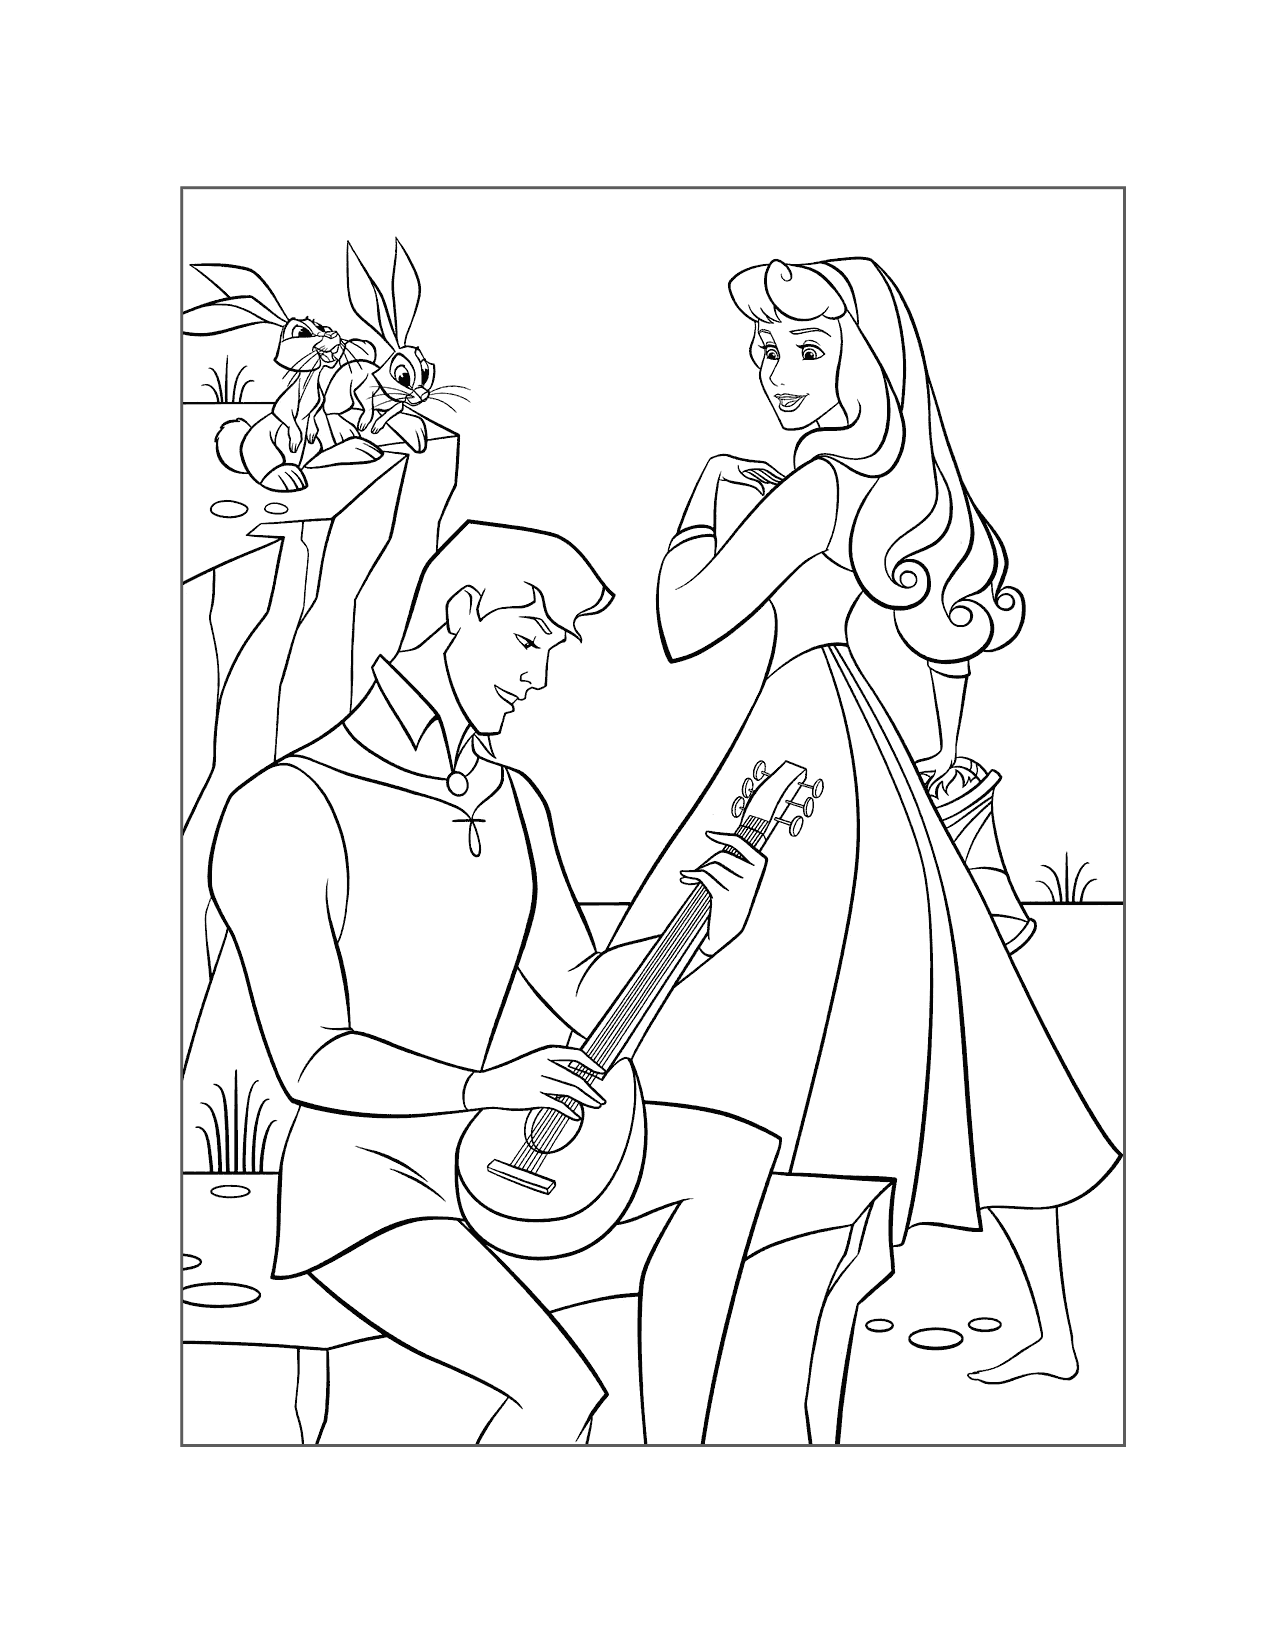 Phillip Plays A Song For Princess Aurora Coloring Page